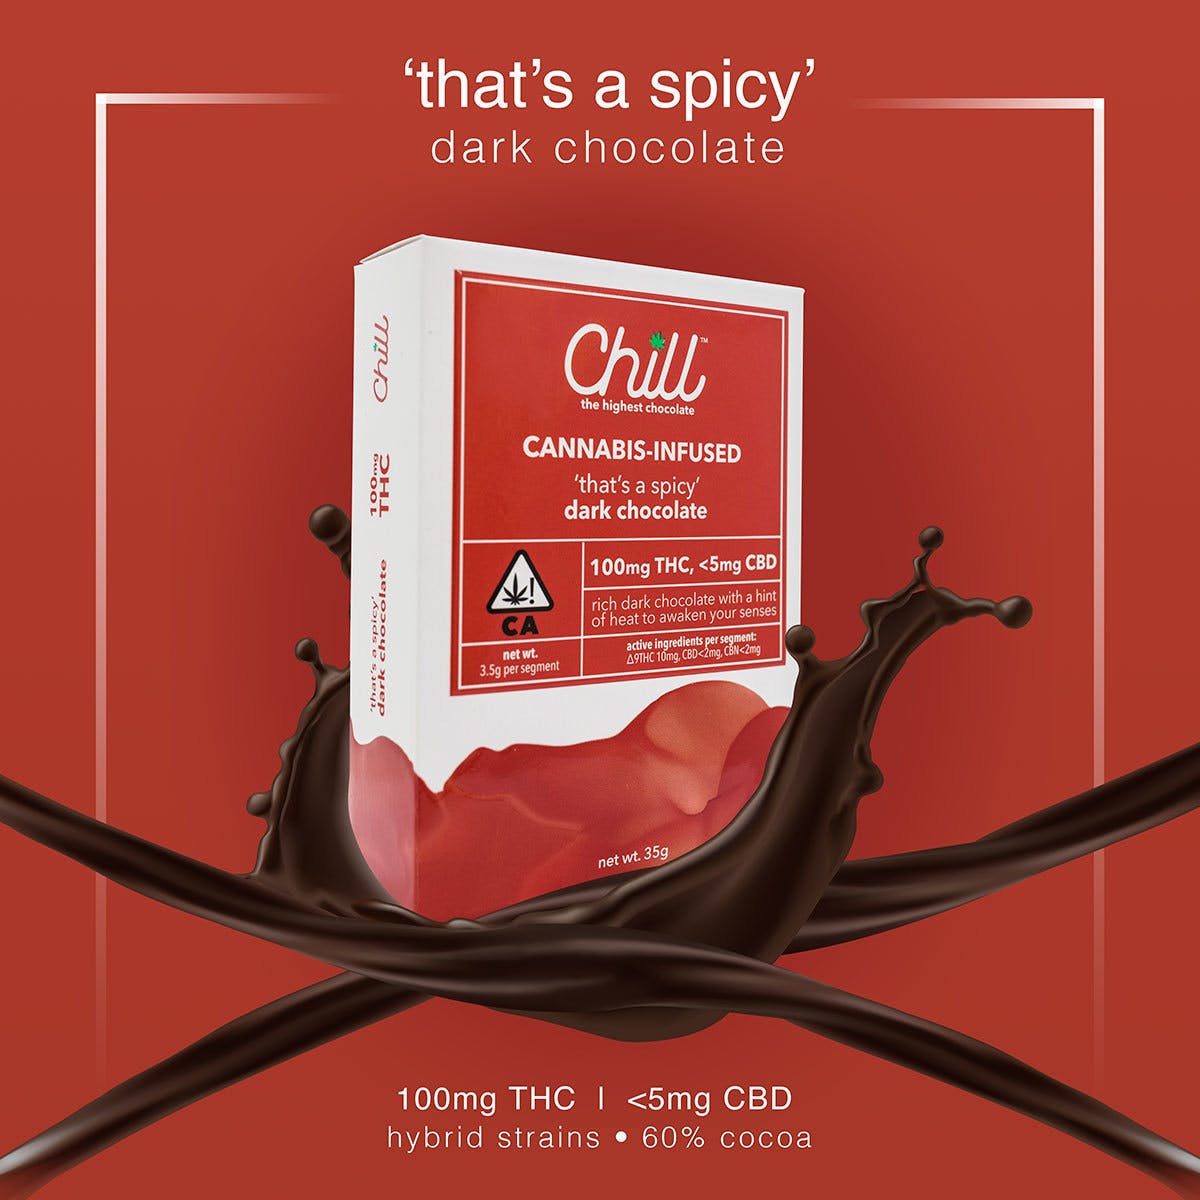 Chill- "that's a spicy" Dark Chocolate